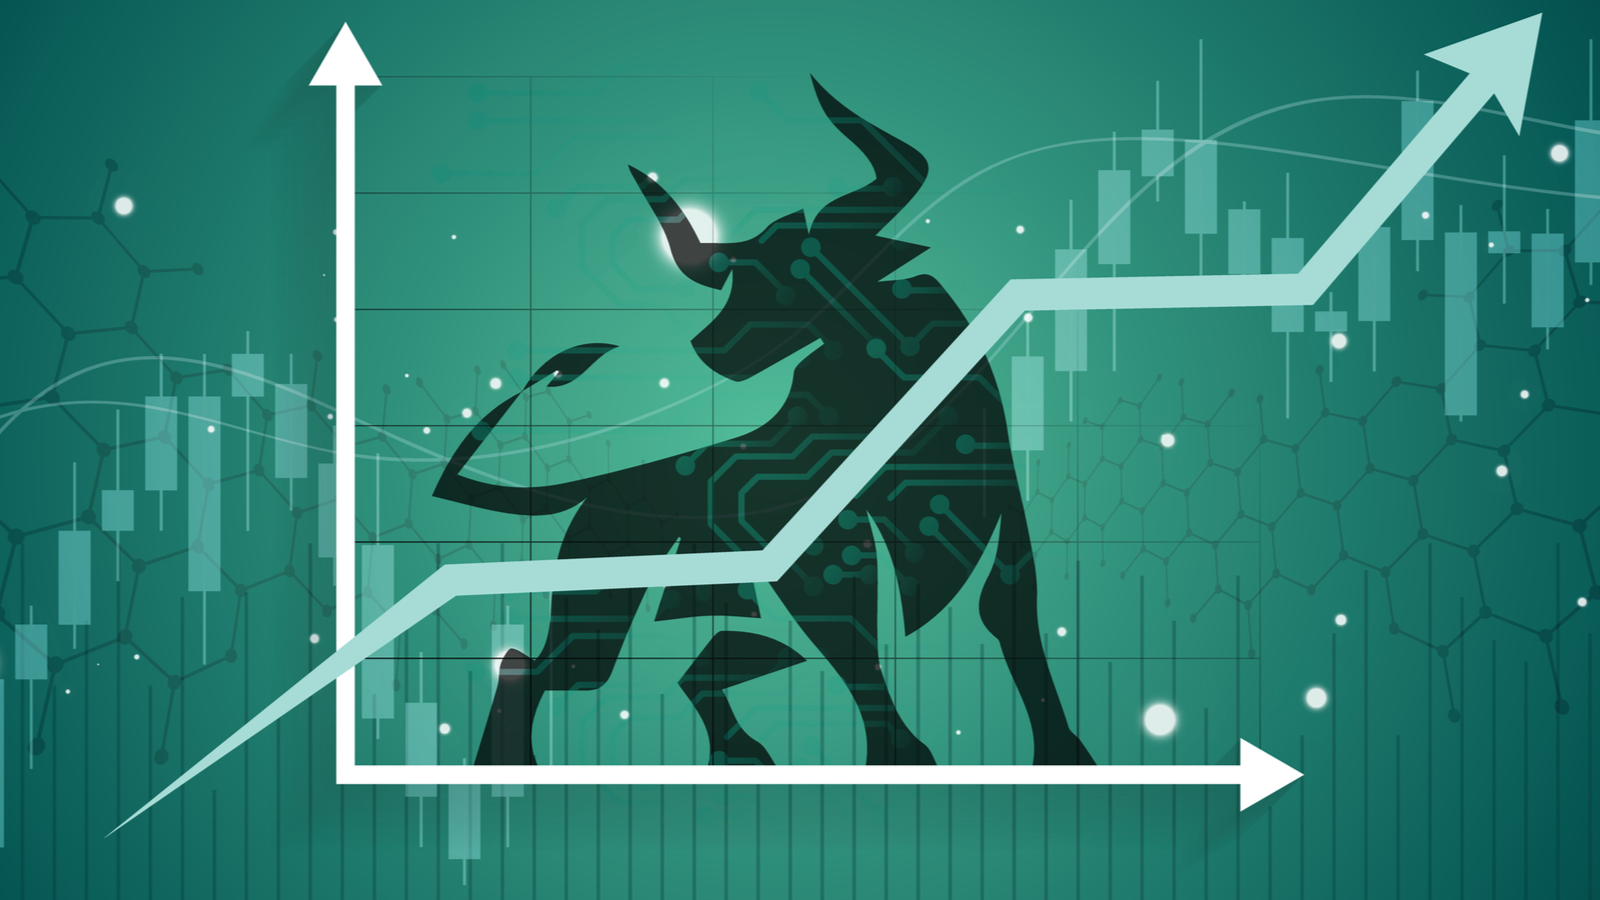 An image of a bull standing behind a stock graph with an upward trend